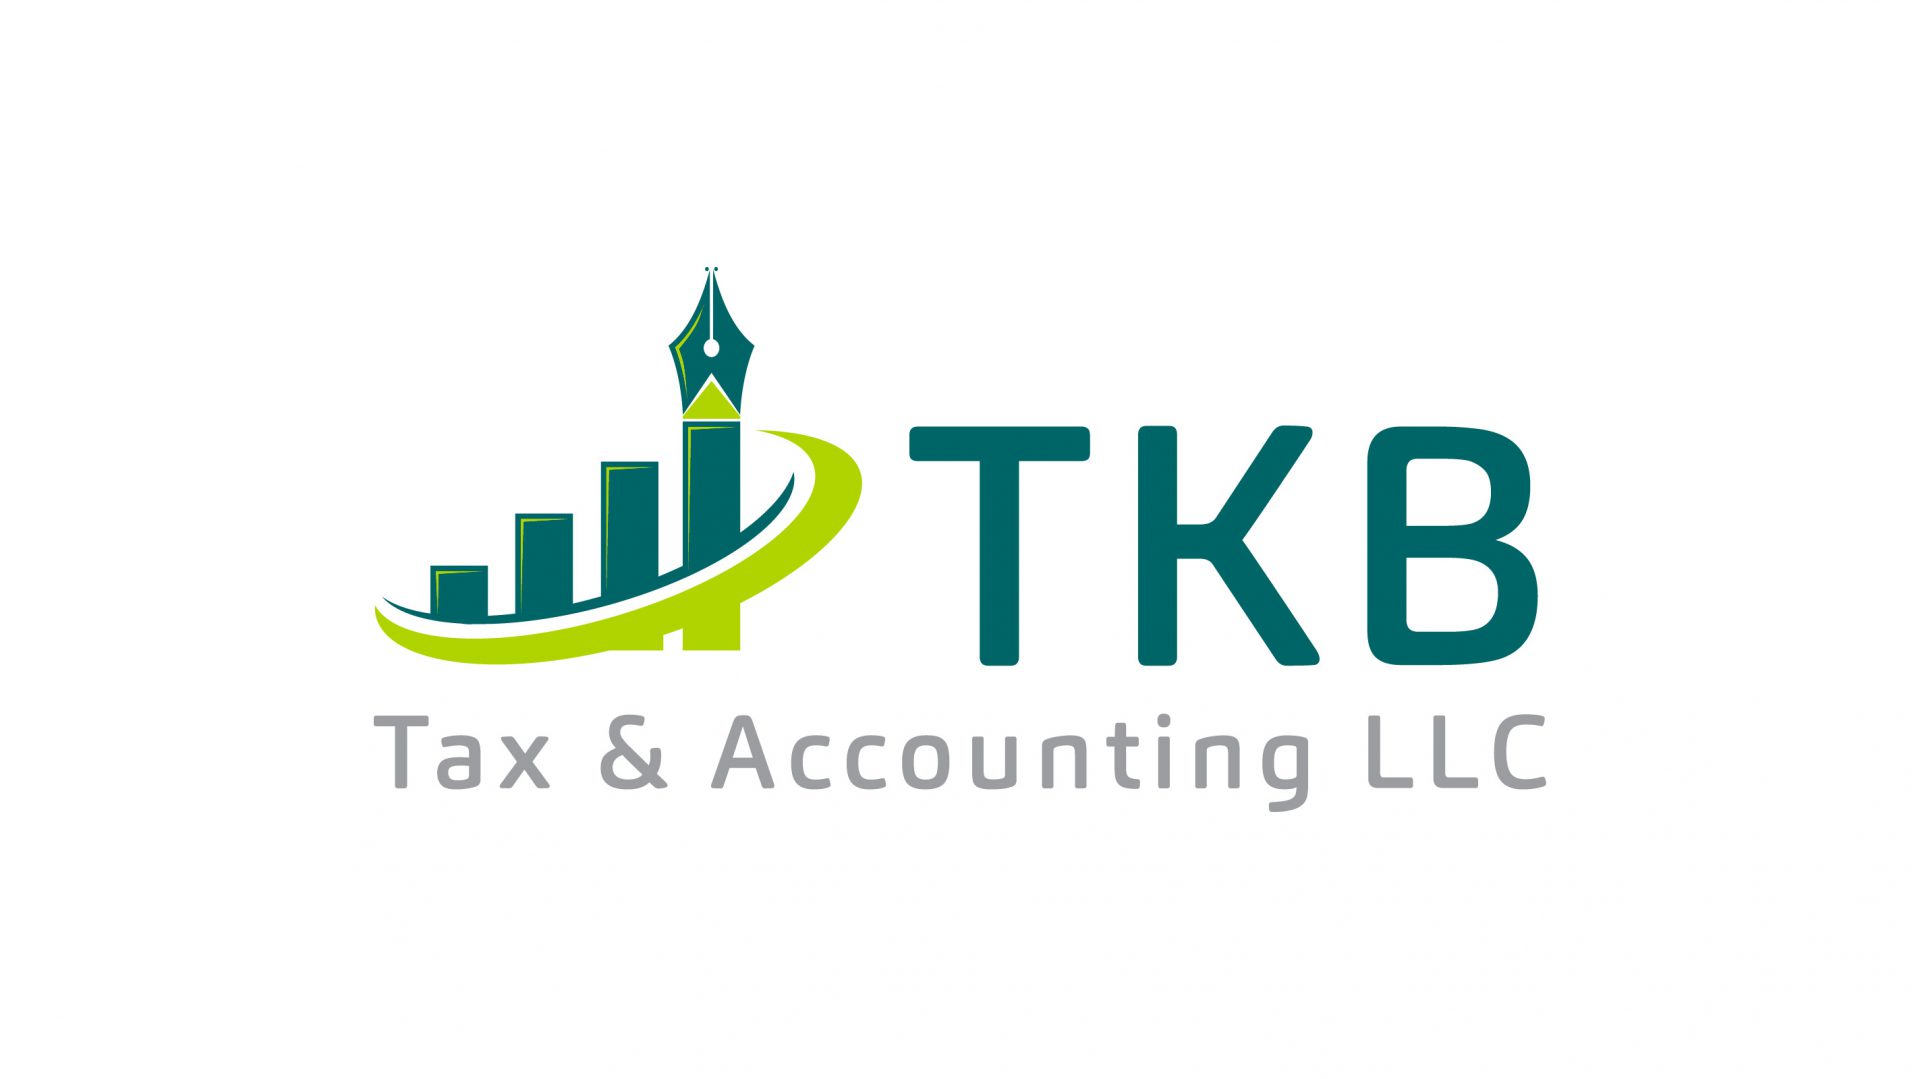 TKB Tax & Accounting LLC refreshes identity and gets a brand new website